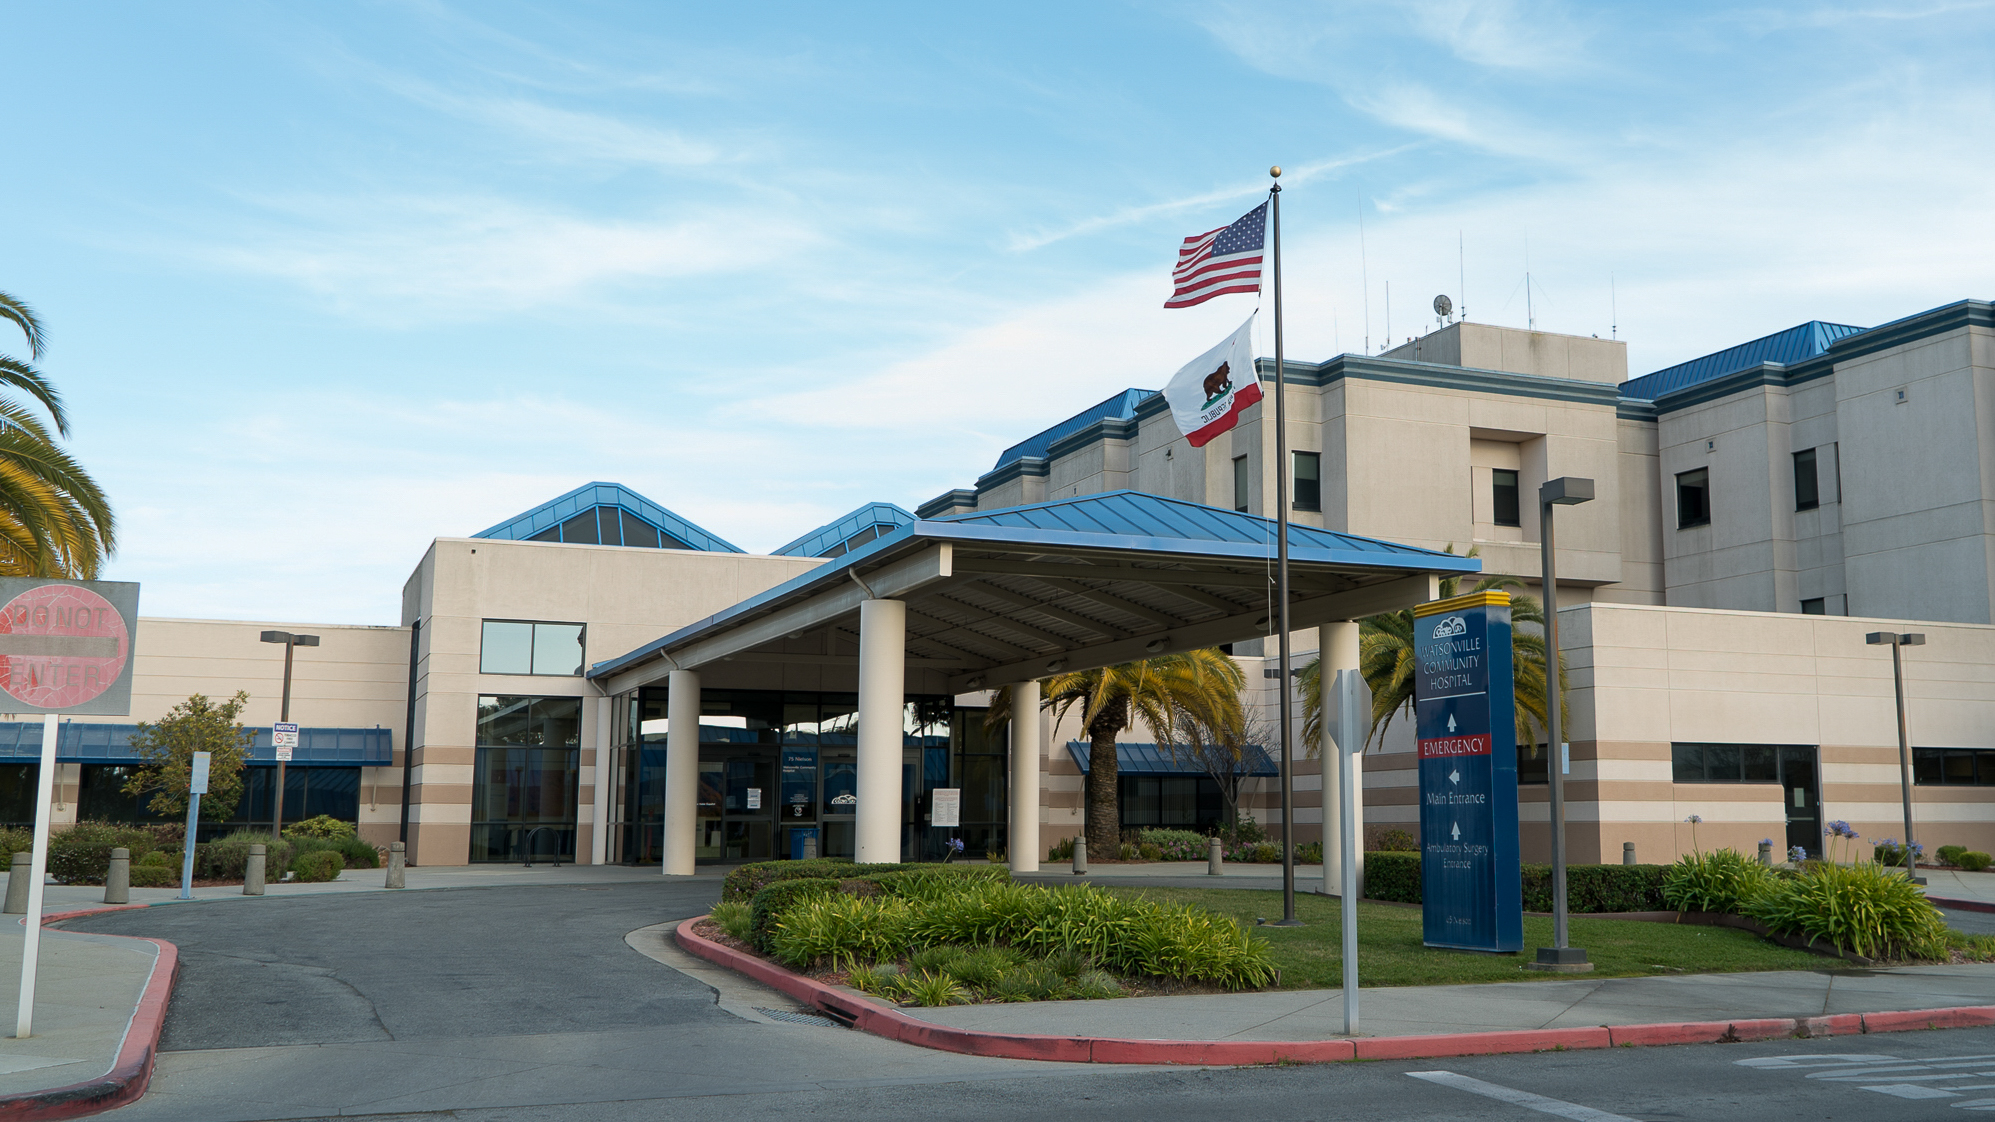 The Watsonville Community Hospital with a blue sky and a flag pole in front with the U.S. and California state flags.